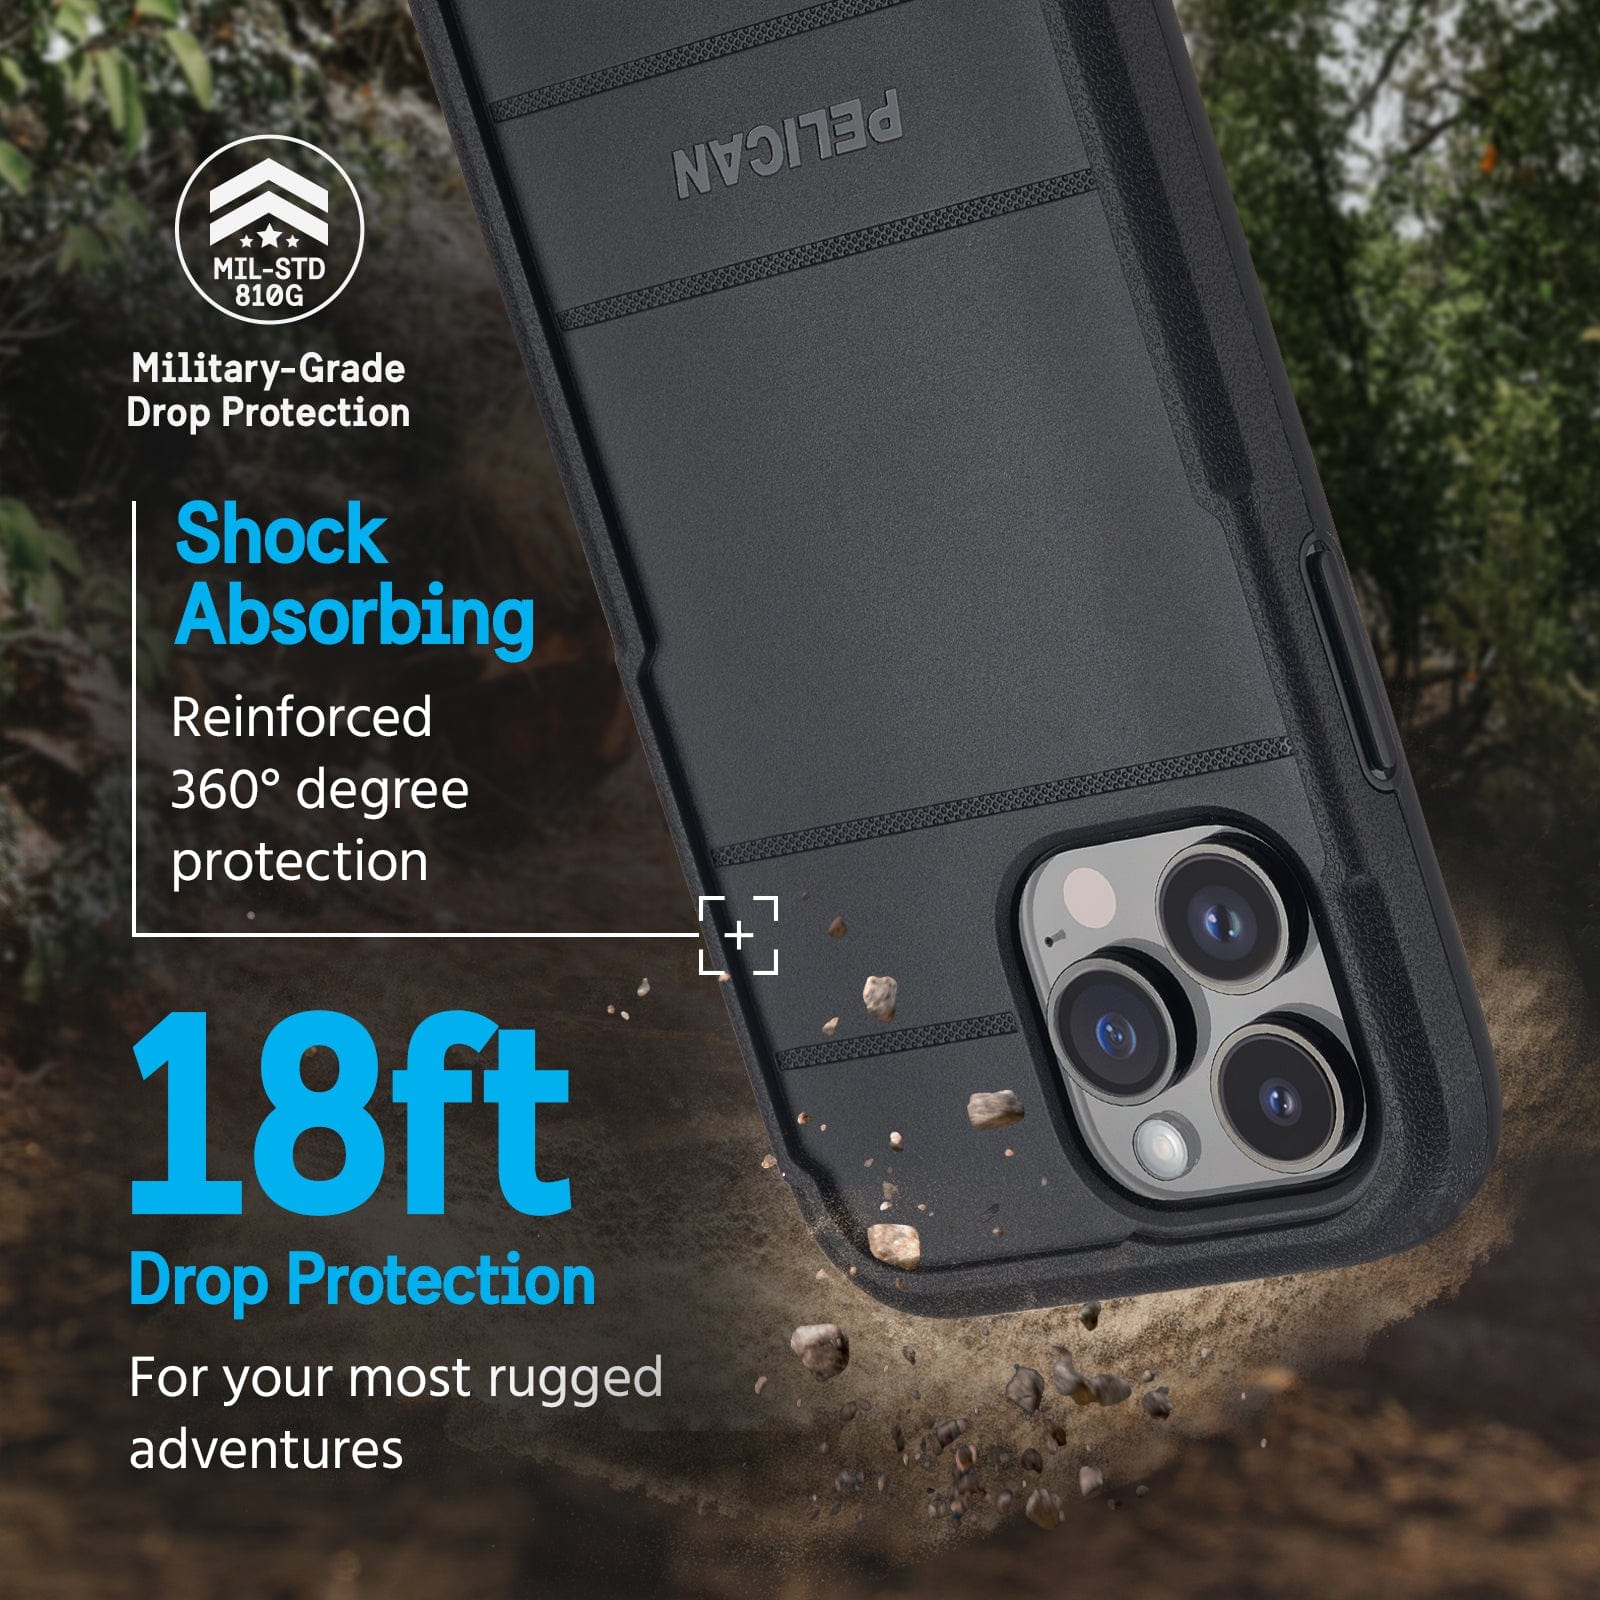 SHOCK ABSORBING REINFORCED 360 DEGREE PROTECTION. 18FT DROP PROTECTION FOR YOUR MOST RUGGED ADVENTURES. 